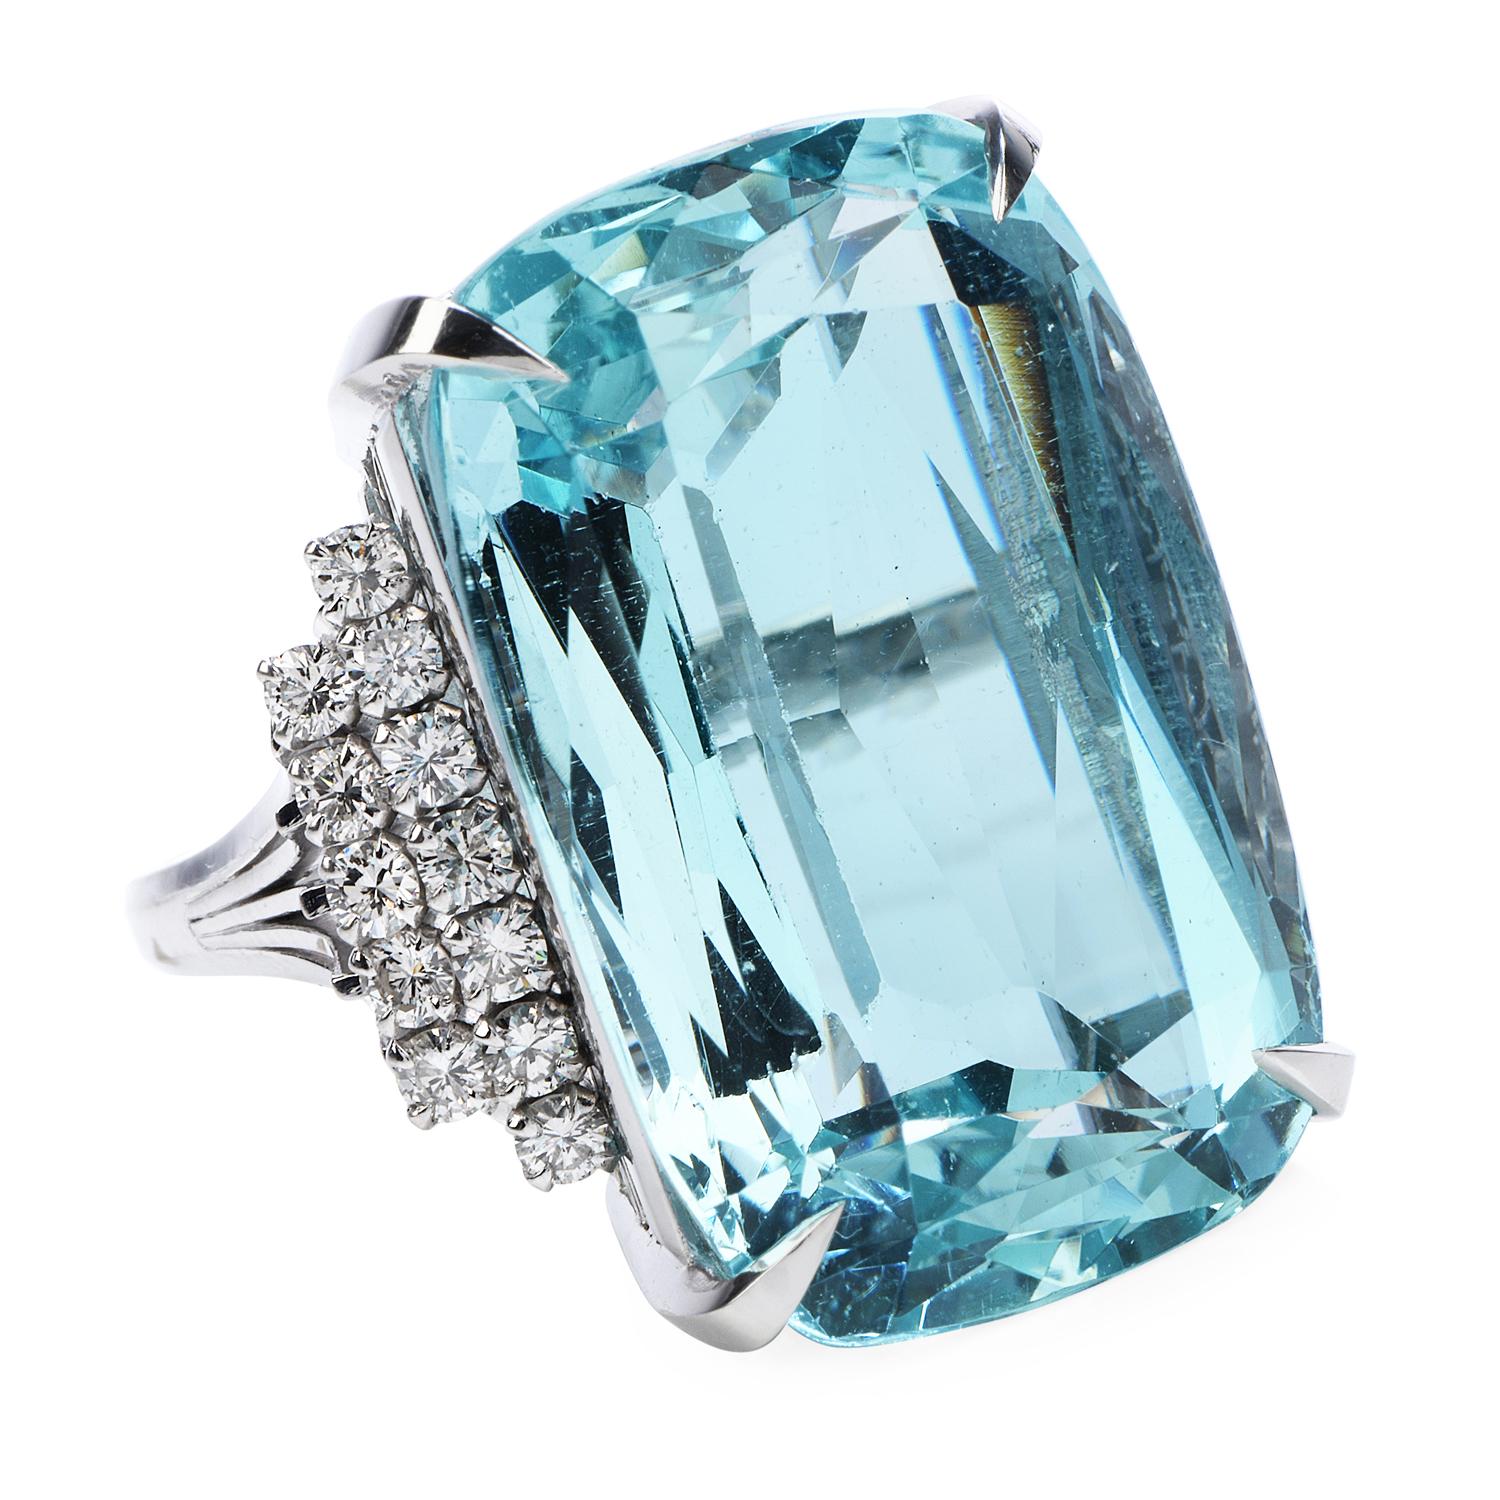 This Sky Blue, full of live Cocktail Ring will captivate the Eyes of everyone!

From the astonishing, center with an Exquisitely GIA Certified Aquamarine,

weighing approx 40.45 carats with 24 round cut diamonds that dance around

and sparkle in any